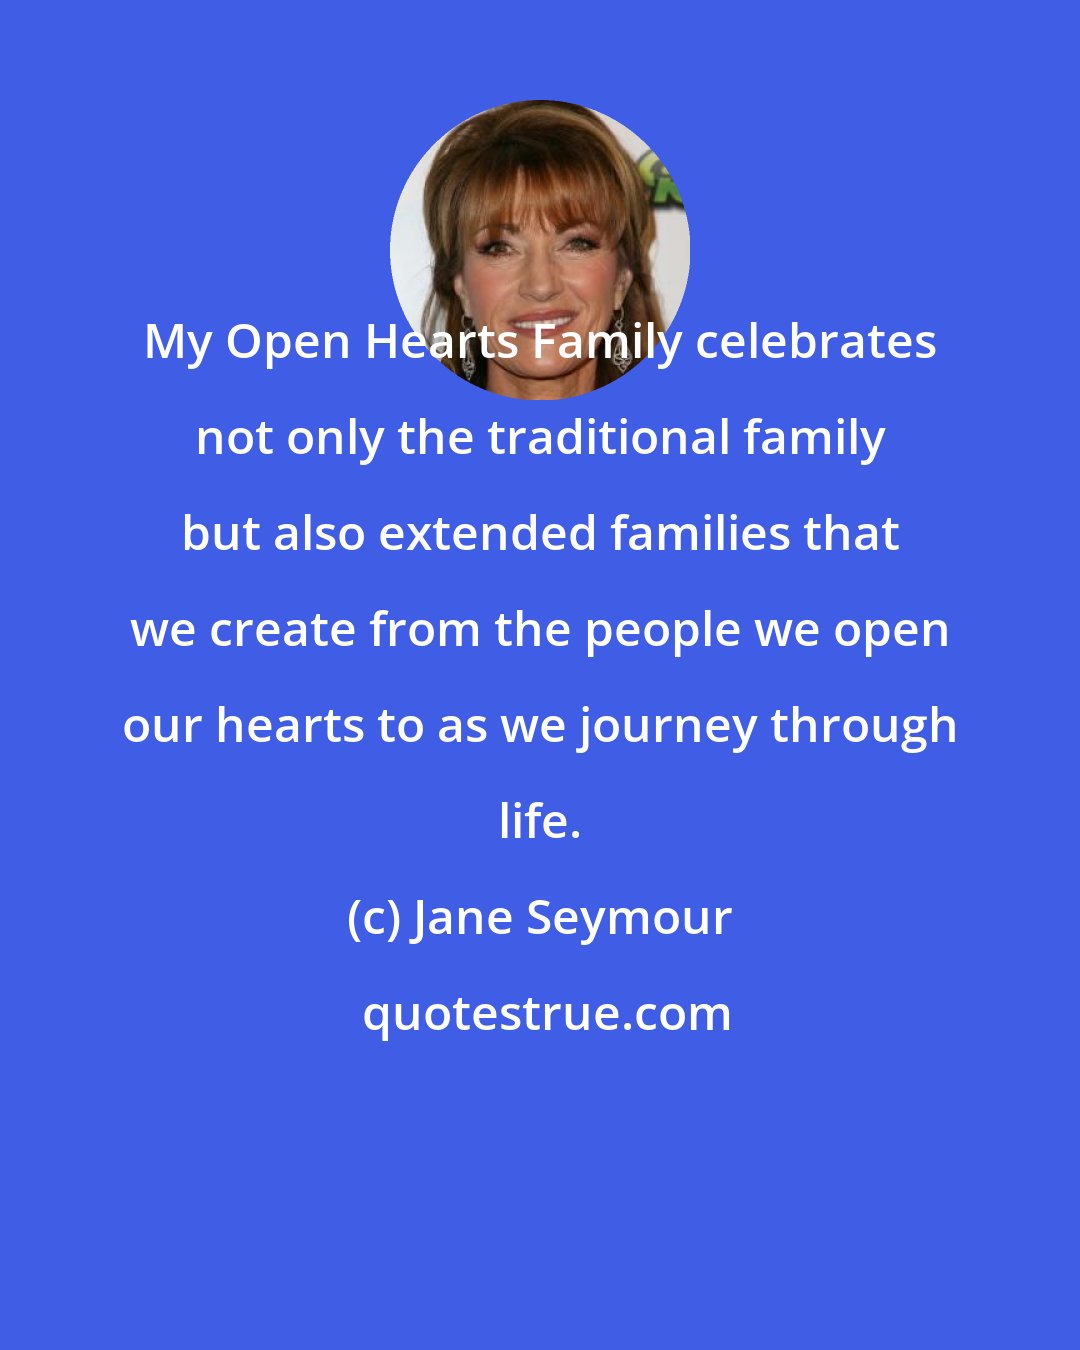 Jane Seymour: My Open Hearts Family celebrates not only the traditional family but also extended families that we create from the people we open our hearts to as we journey through life.